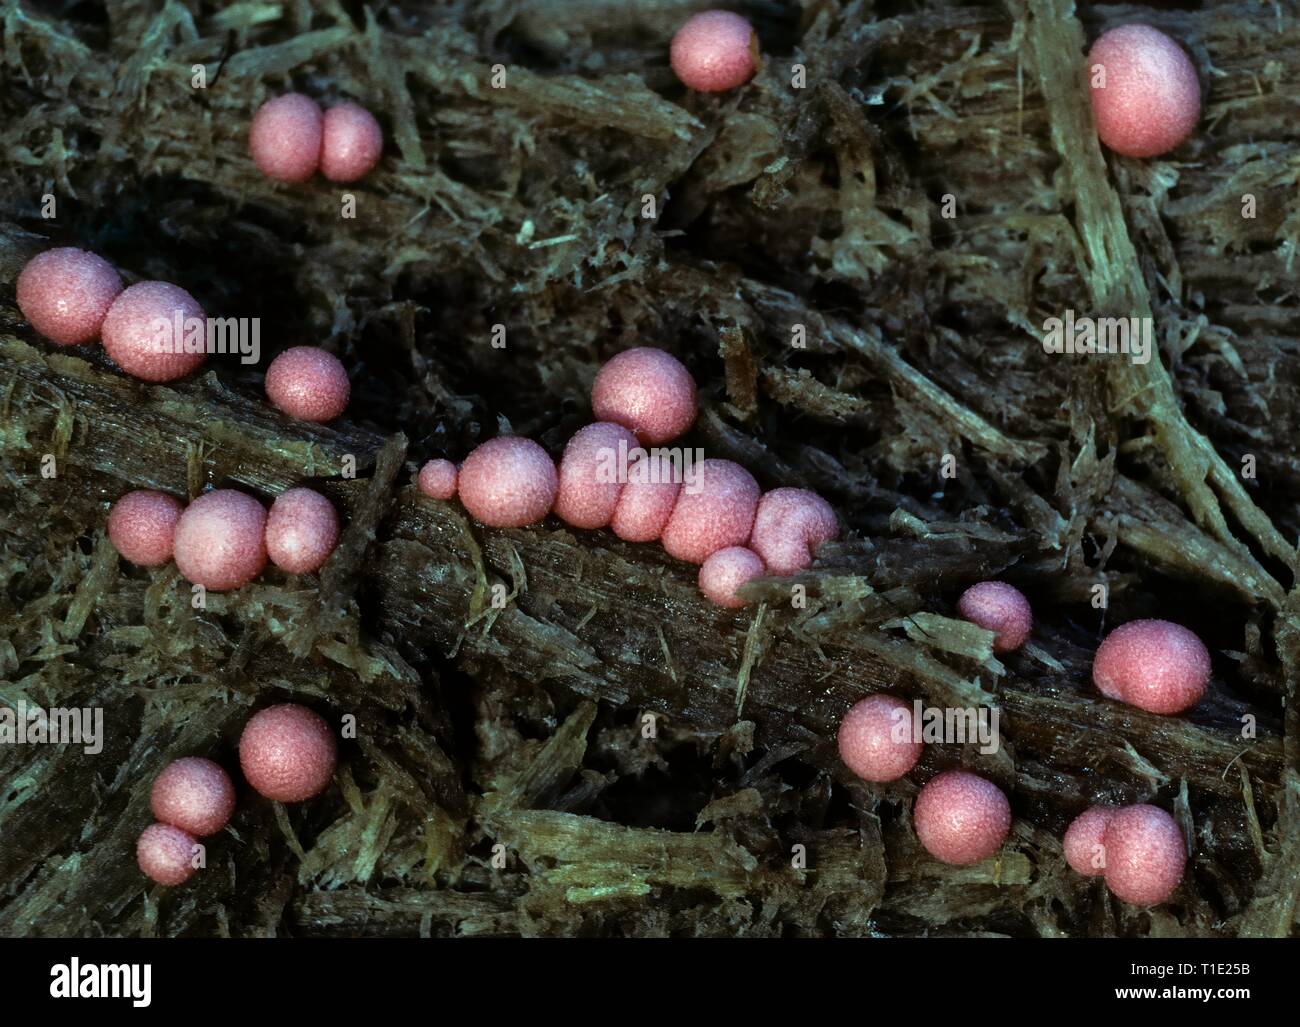 Fruiting bodies of wolf's-milk slime mold (Lycogala epidendrum) on rotting log. Northern Virginia, U.S.A. Stock Photo